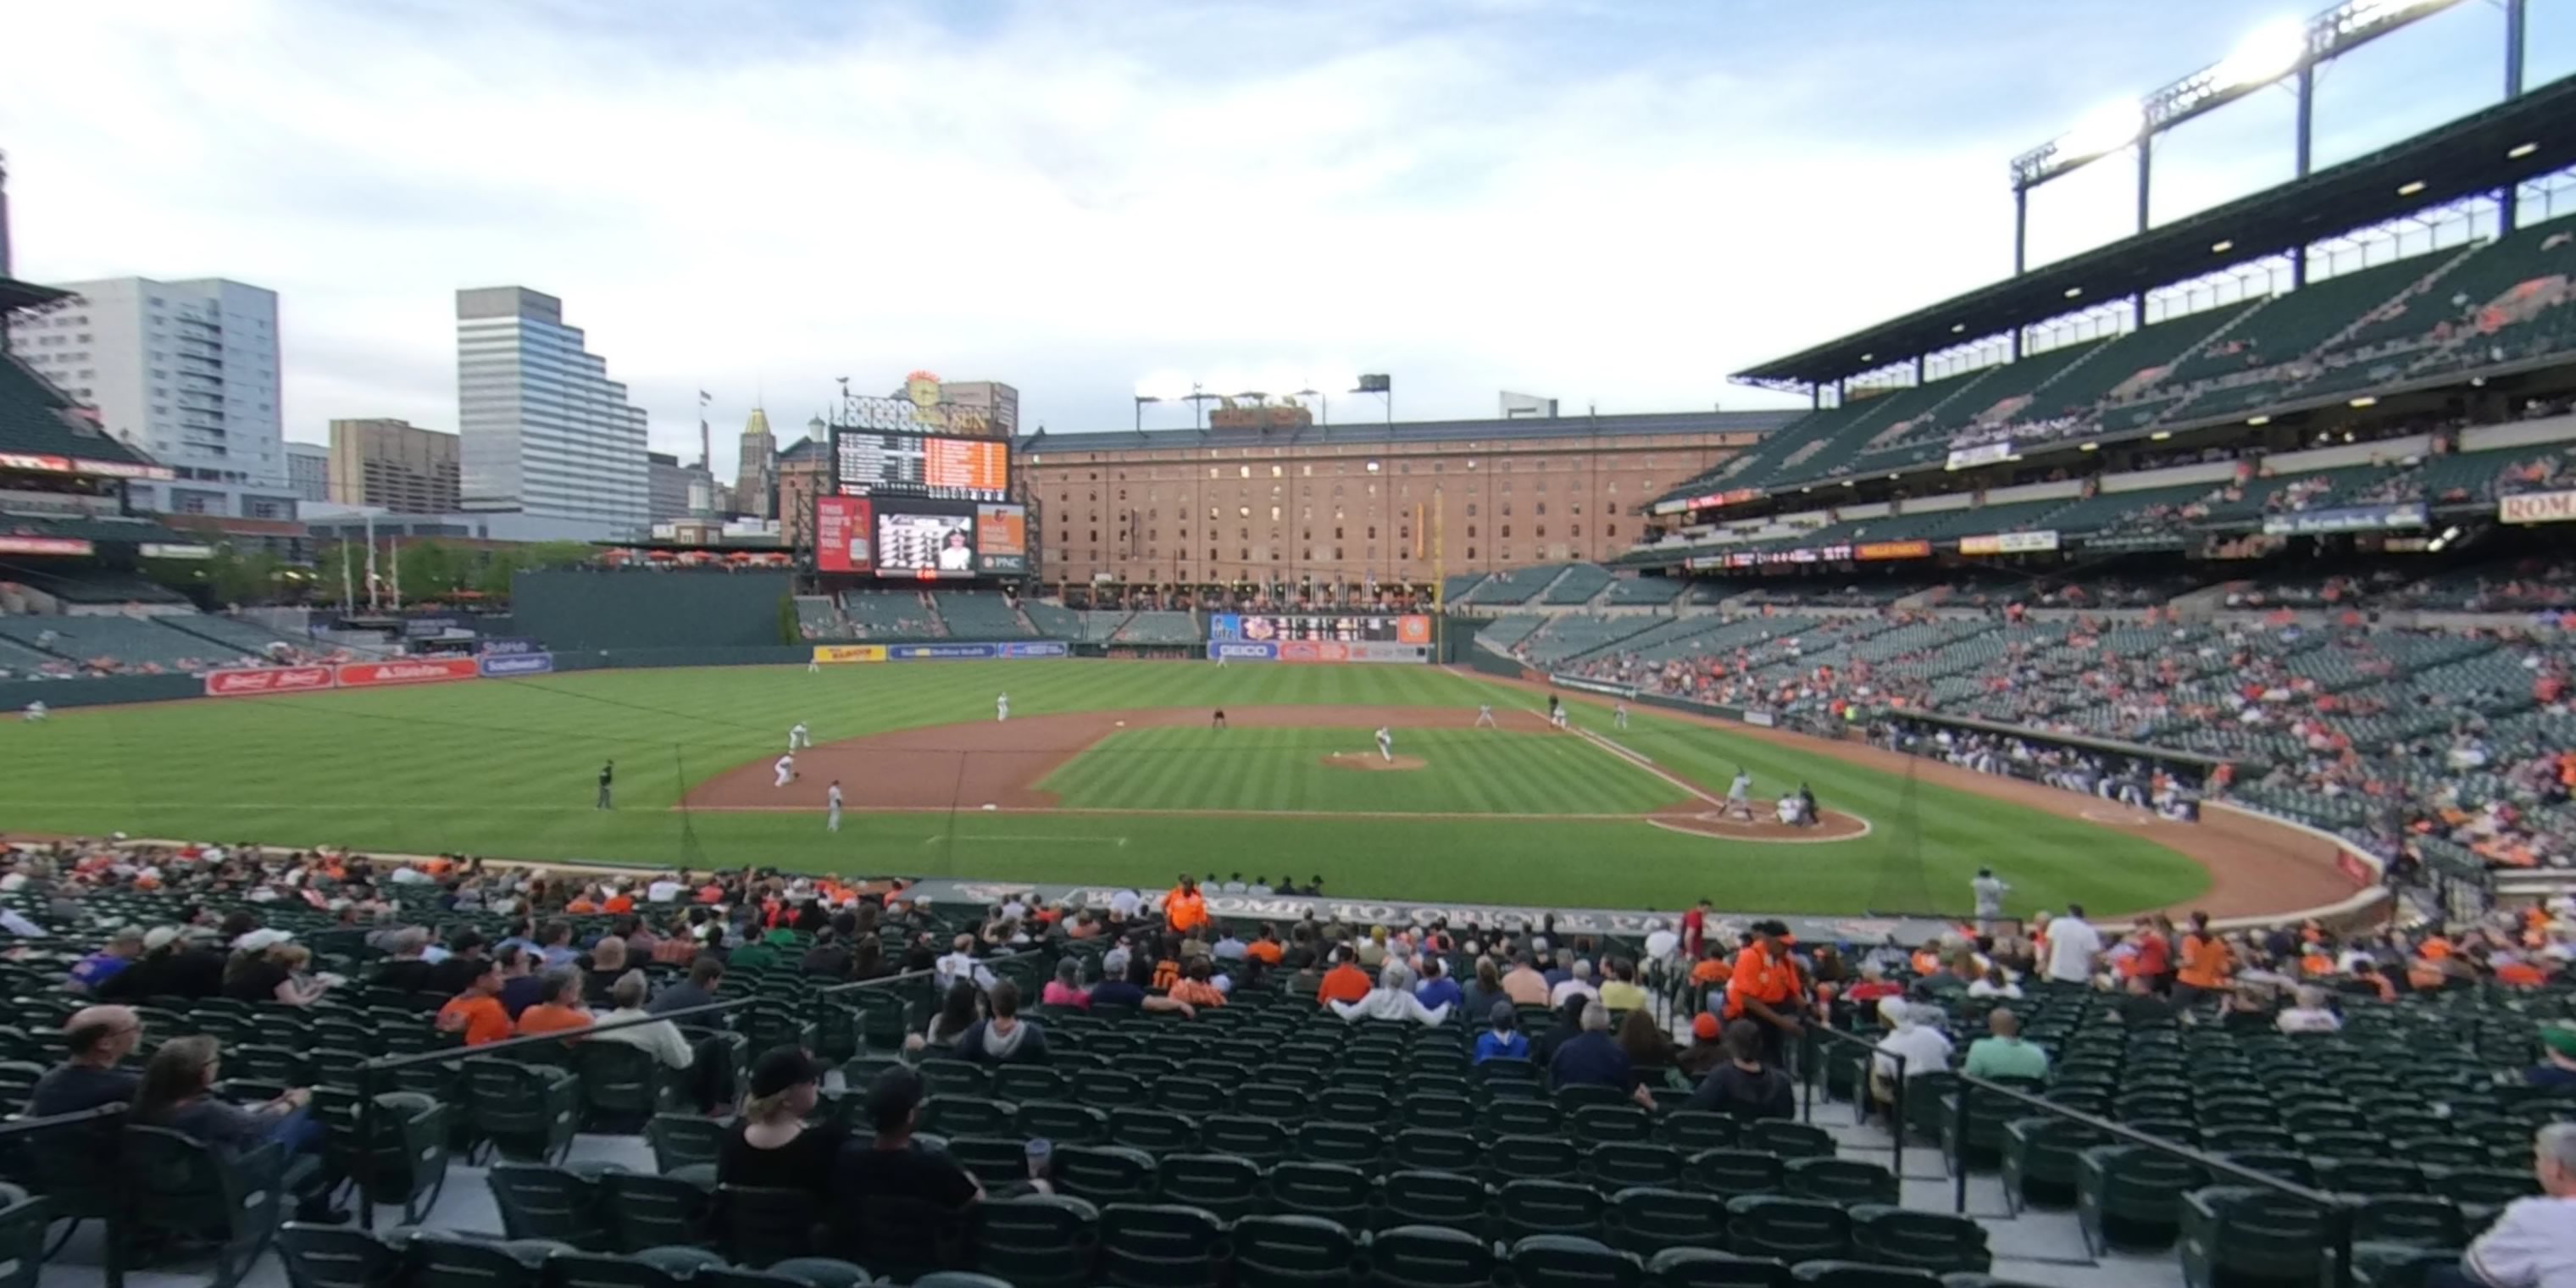 section 48 panoramic seat view  - oriole park